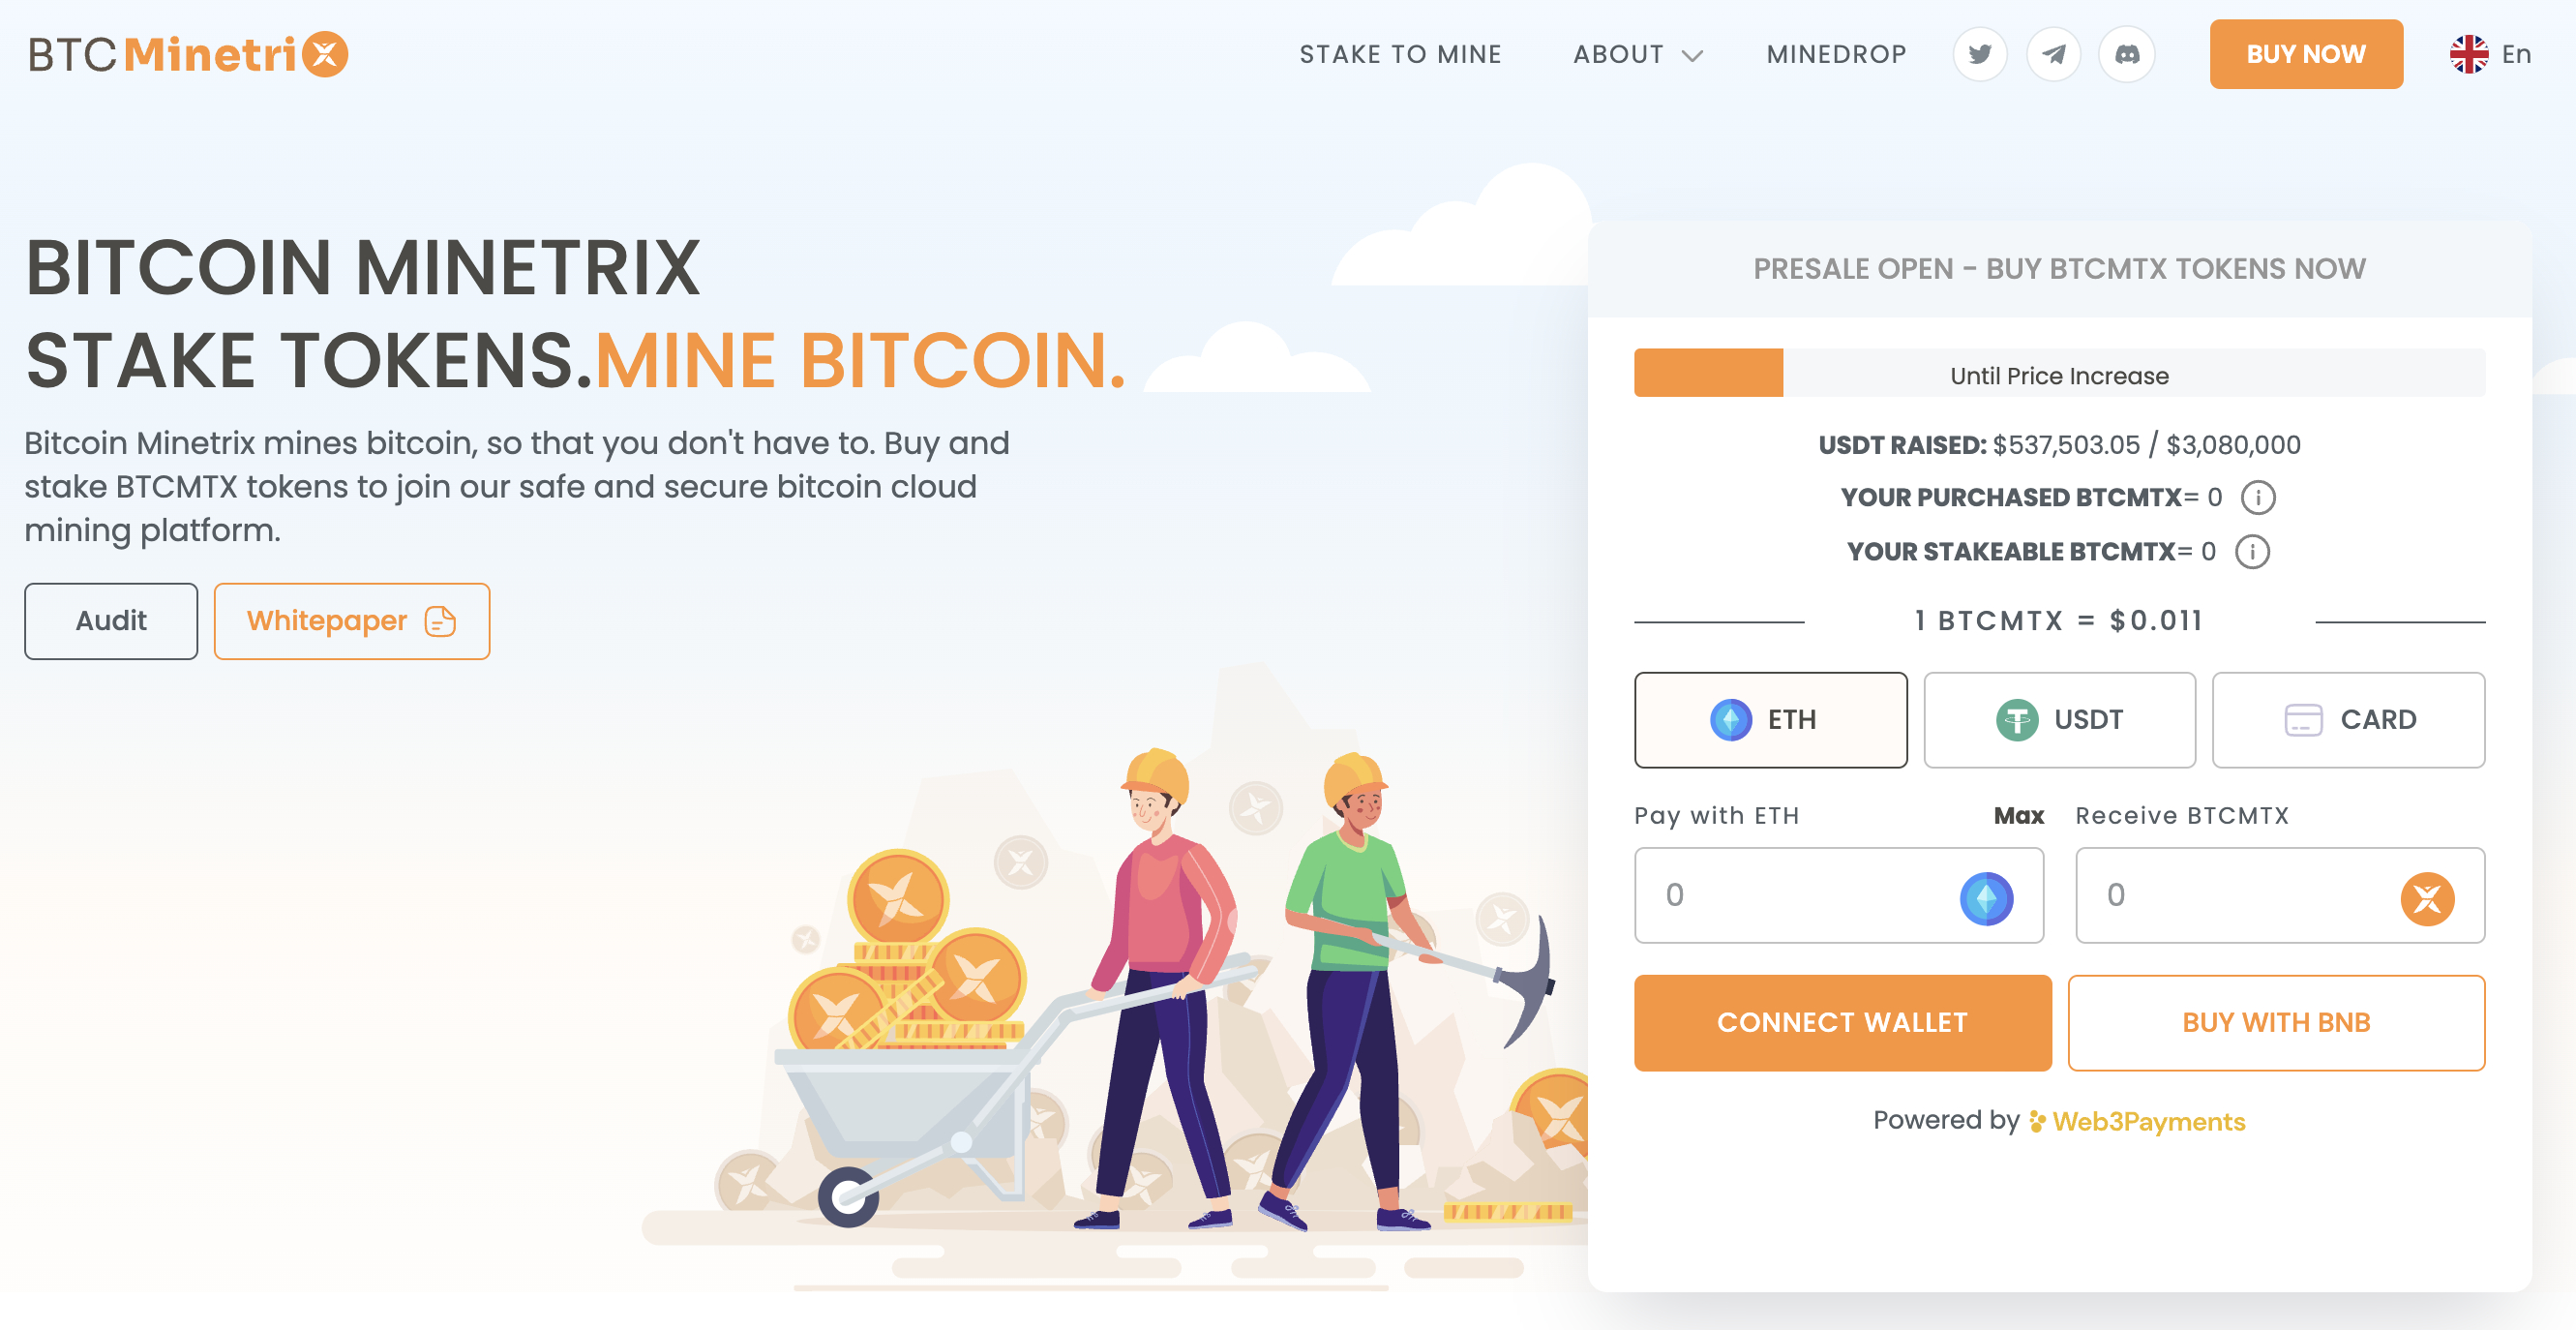 Bitcoin Minetrix Raises $500,000 in Presale, Influencers Say It’s The Best Crypto to Buy Now